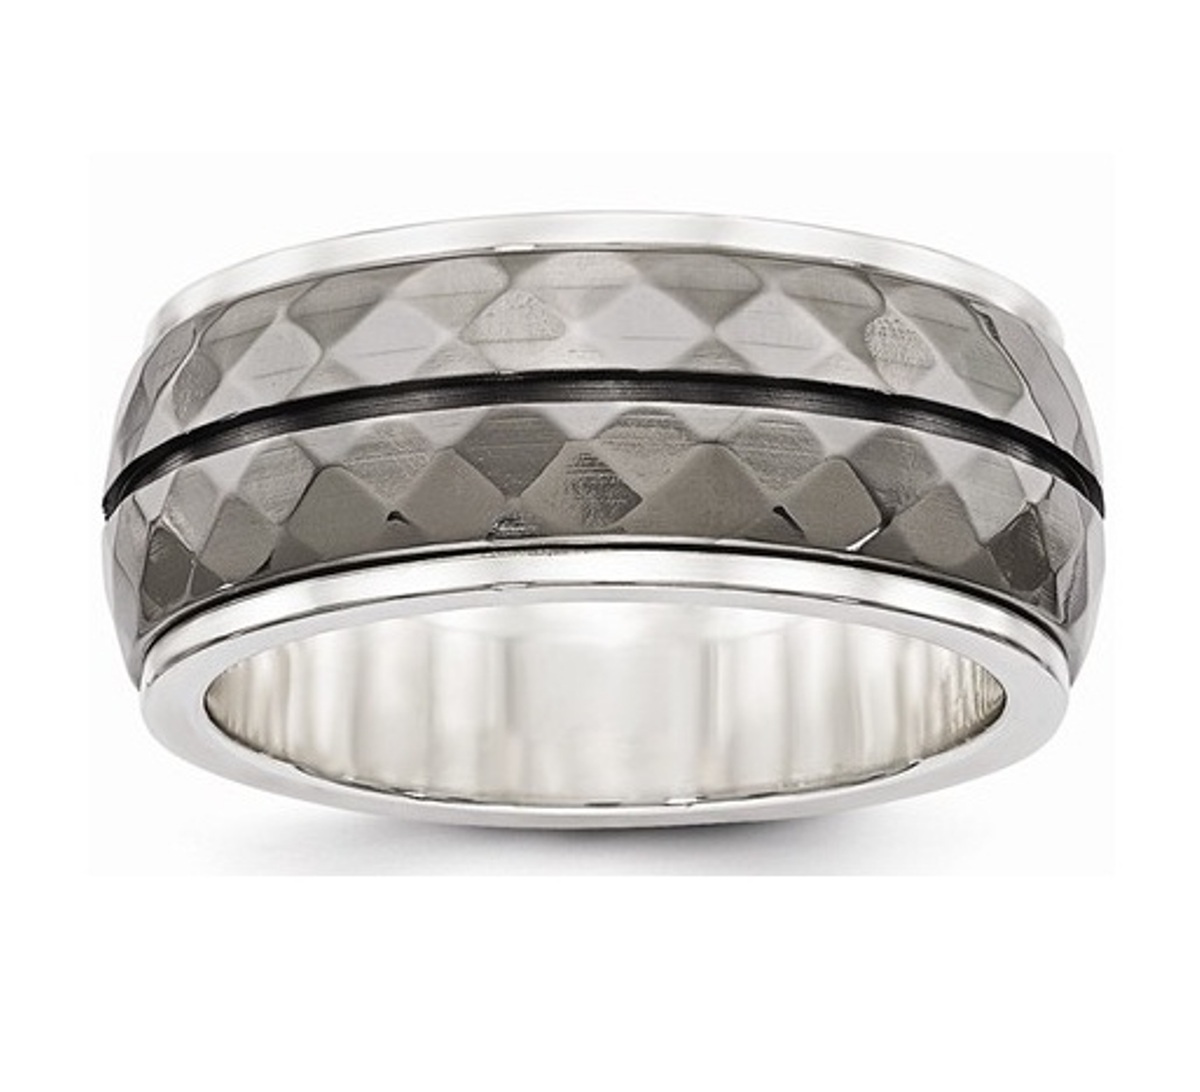  Sterling Silver And Black Ti Inlay Black Stripe Ring